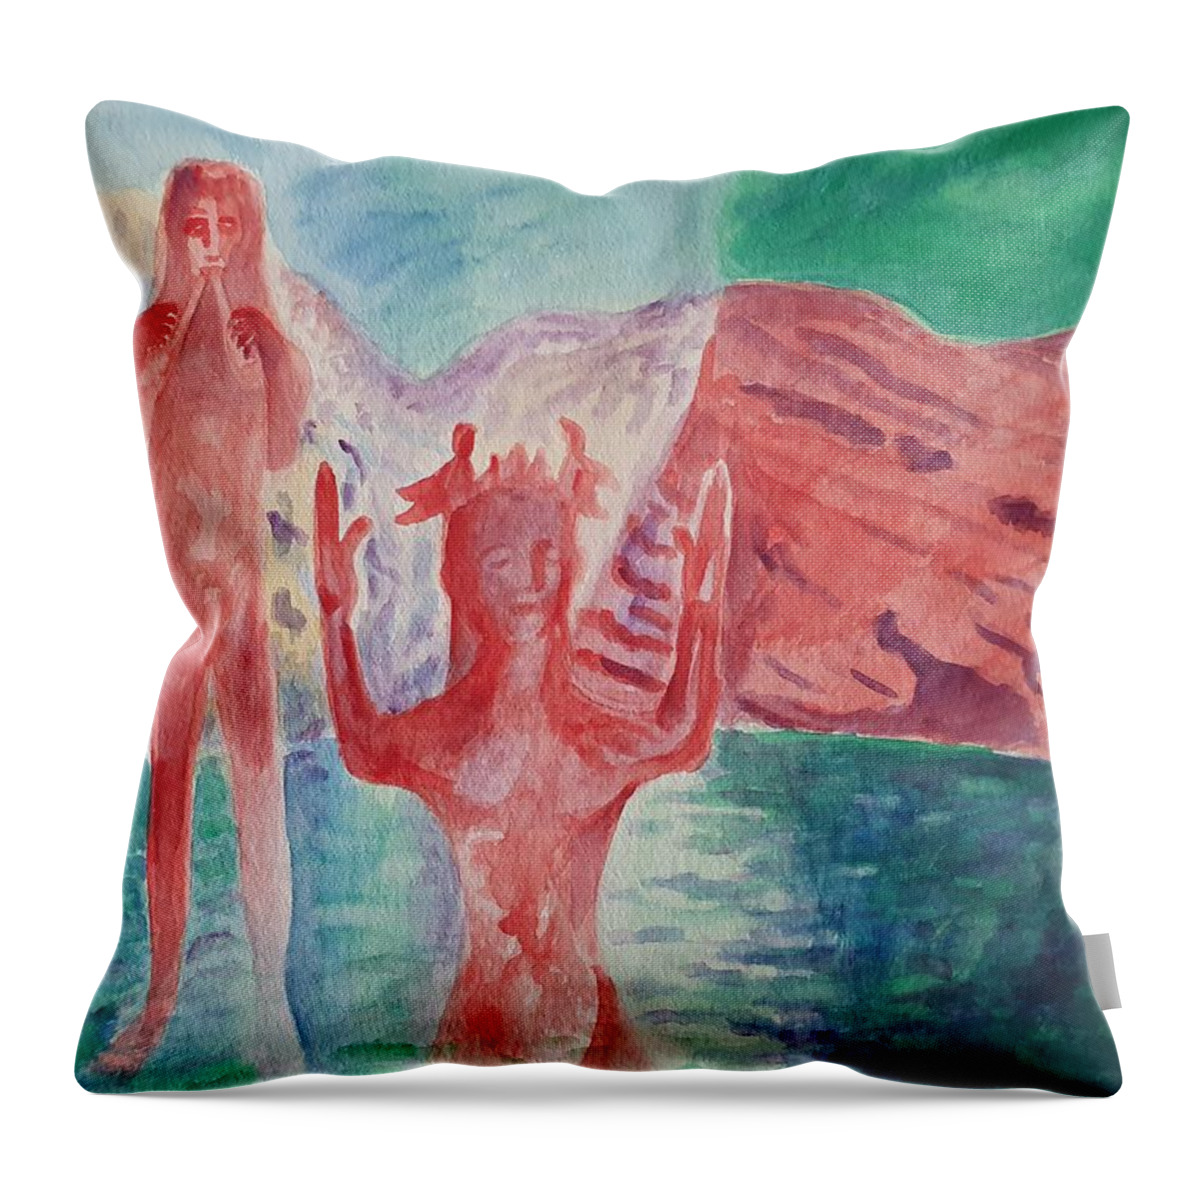 Sculpture Throw Pillow featuring the painting Cycladic Tune by Enrico Garff